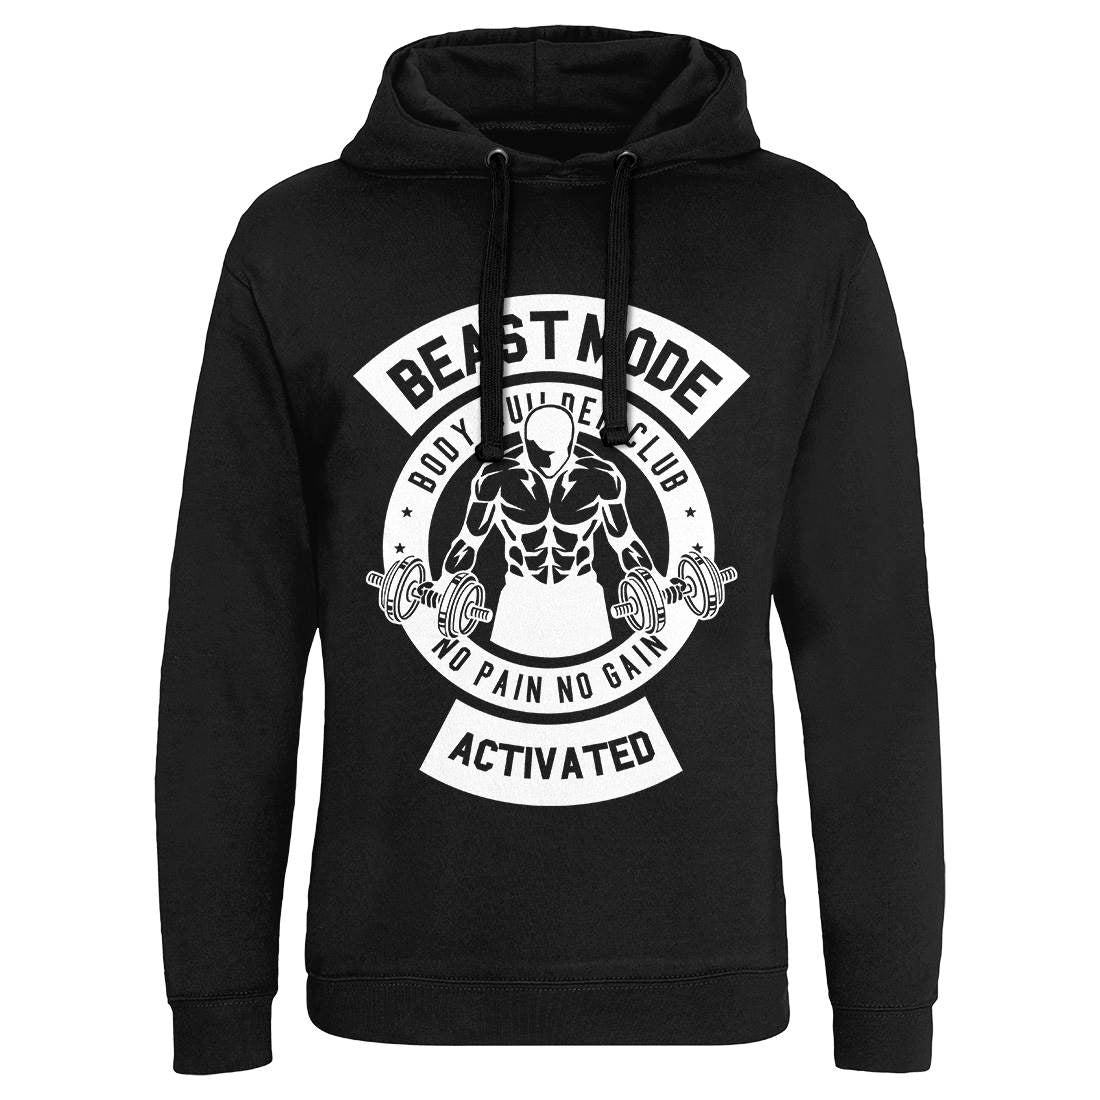 Beast Mode Activated Mens Hoodie Without Pocket Gym B493